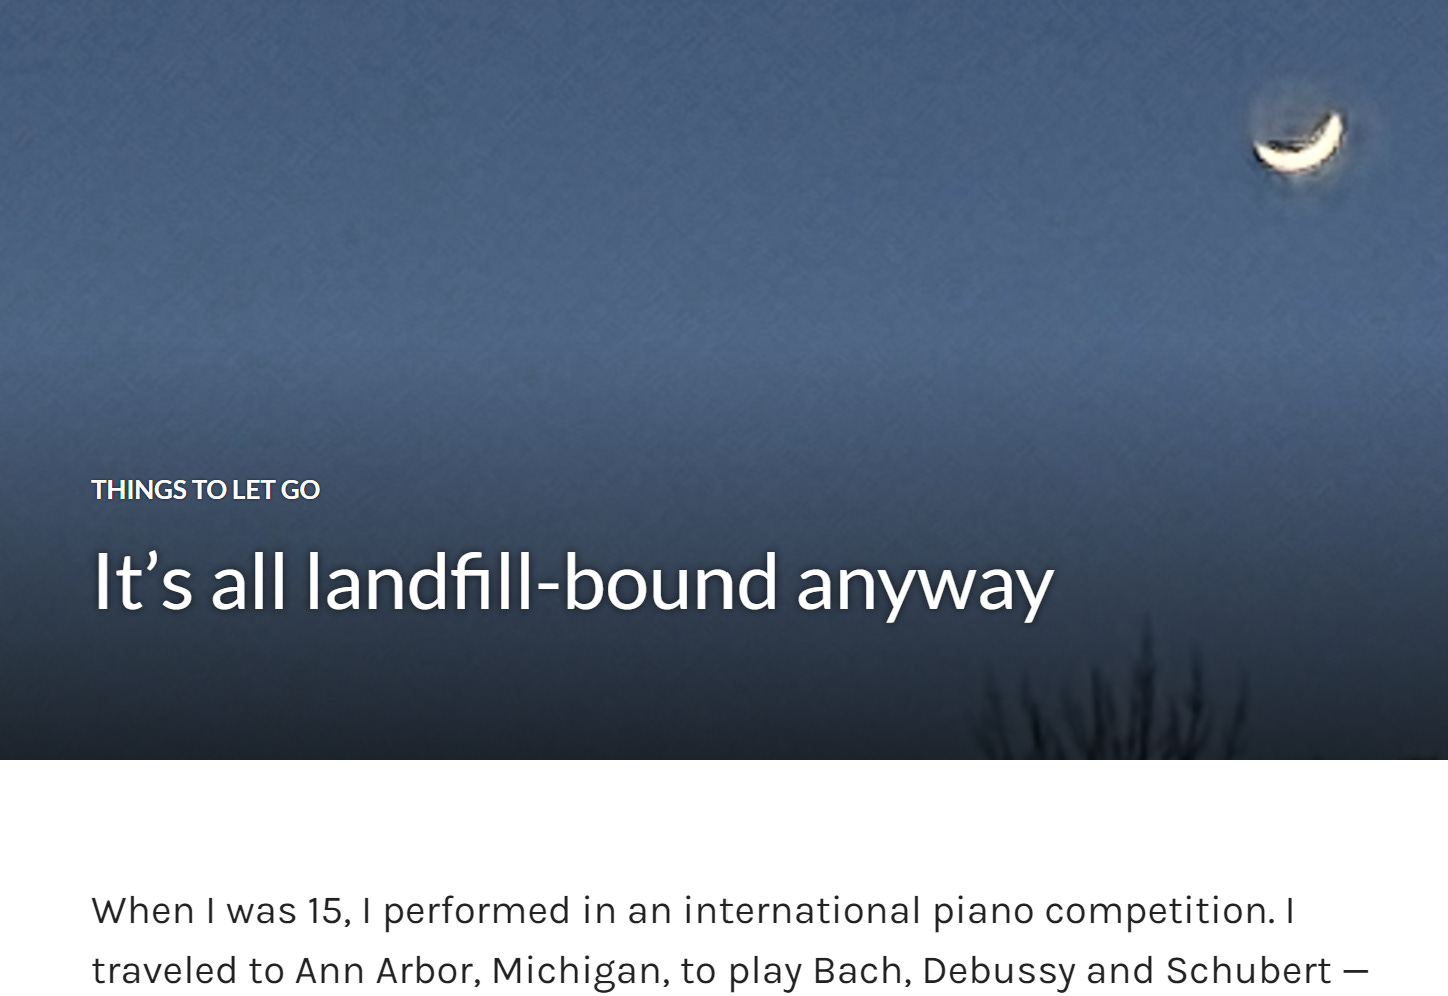 Screenshot of blog post titled "It's all landfill-bound anyway" featuring a photo of a crescent moon in the night sky